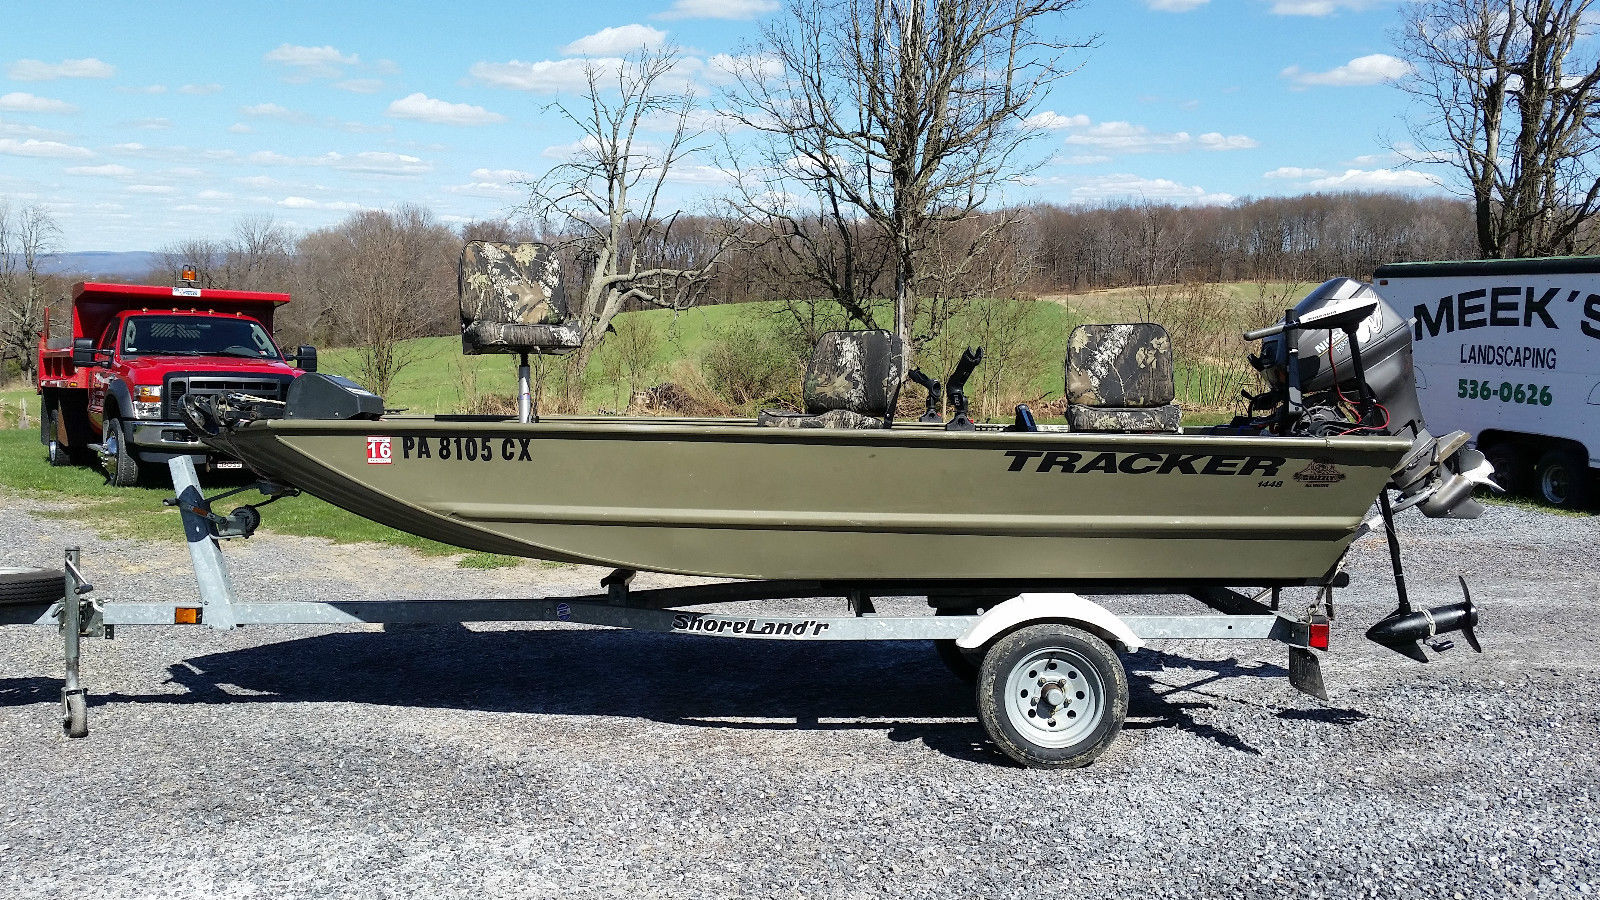 Tracker Grizzly 2004 for sale for $4,000 - Boats-from-USA.com